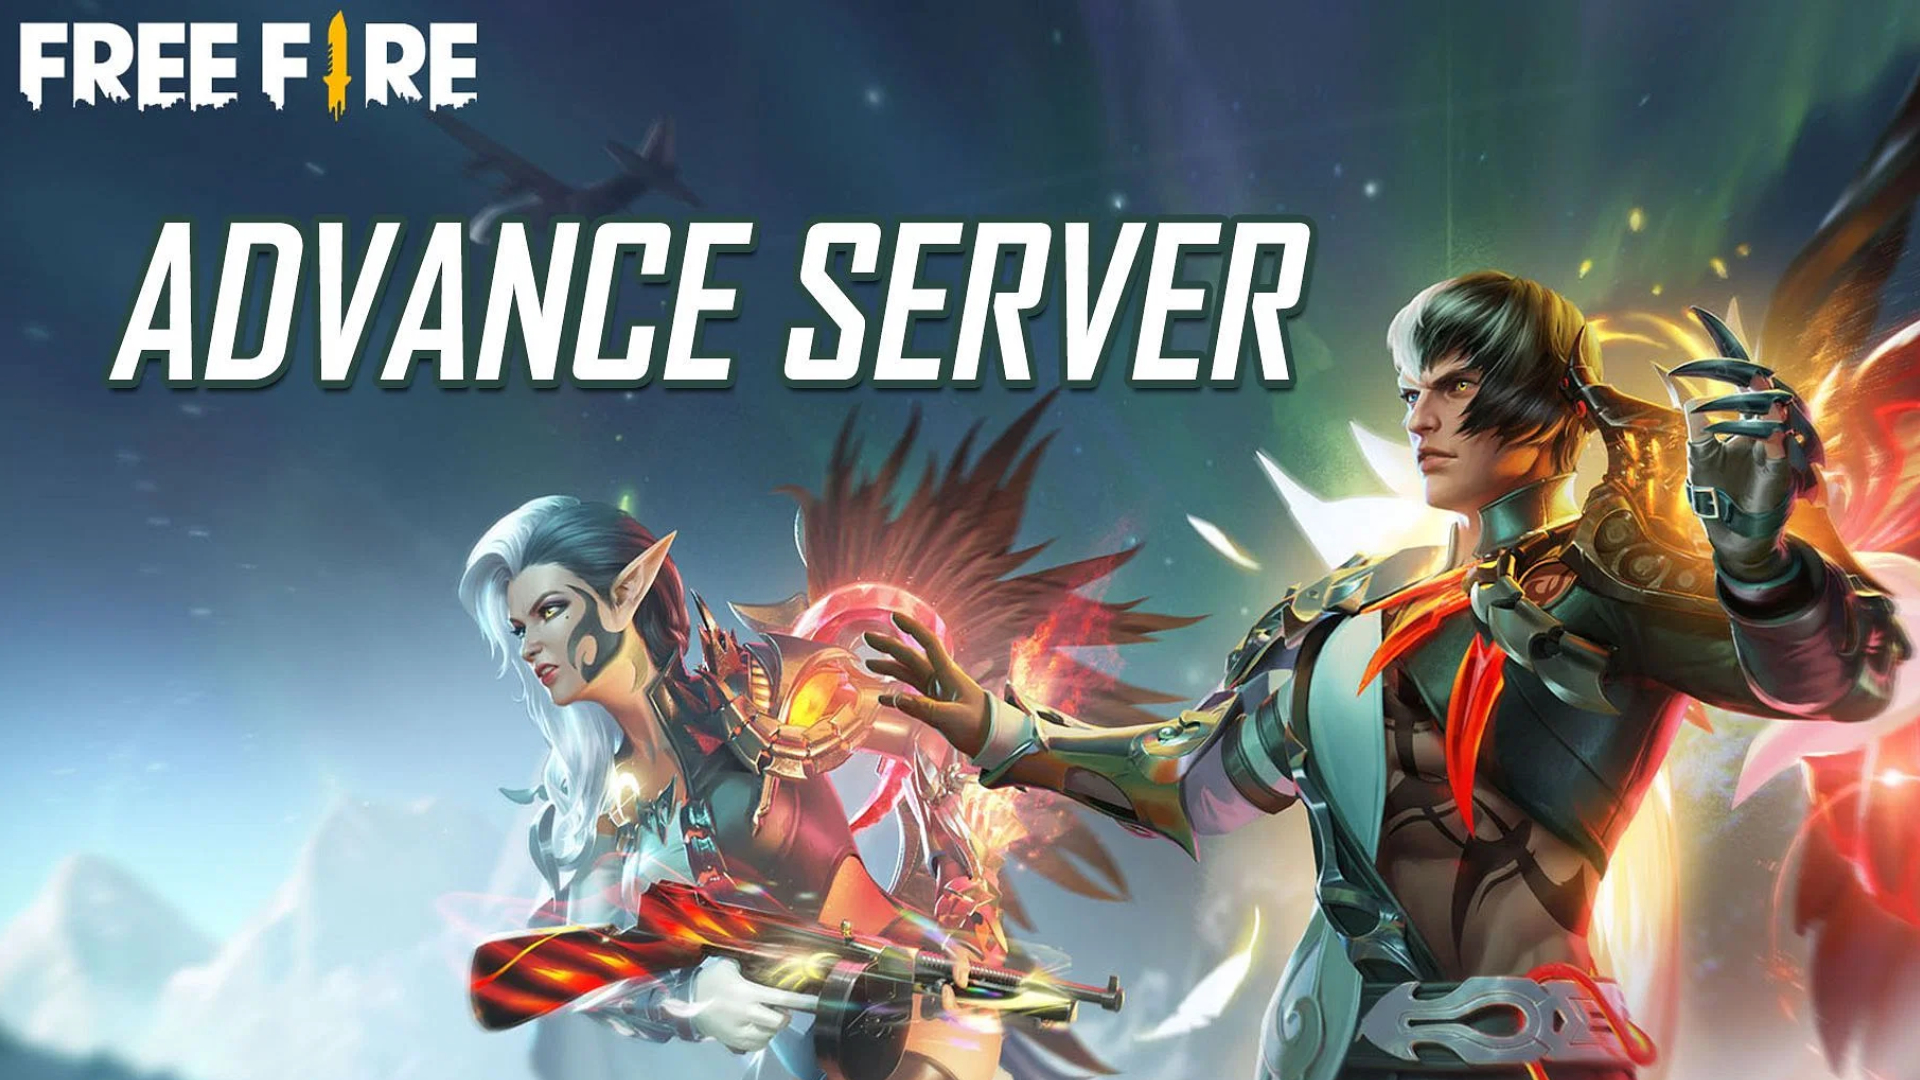 Free Fire Advance Server: A Comprehensive Review of the Latest Features and Updates image